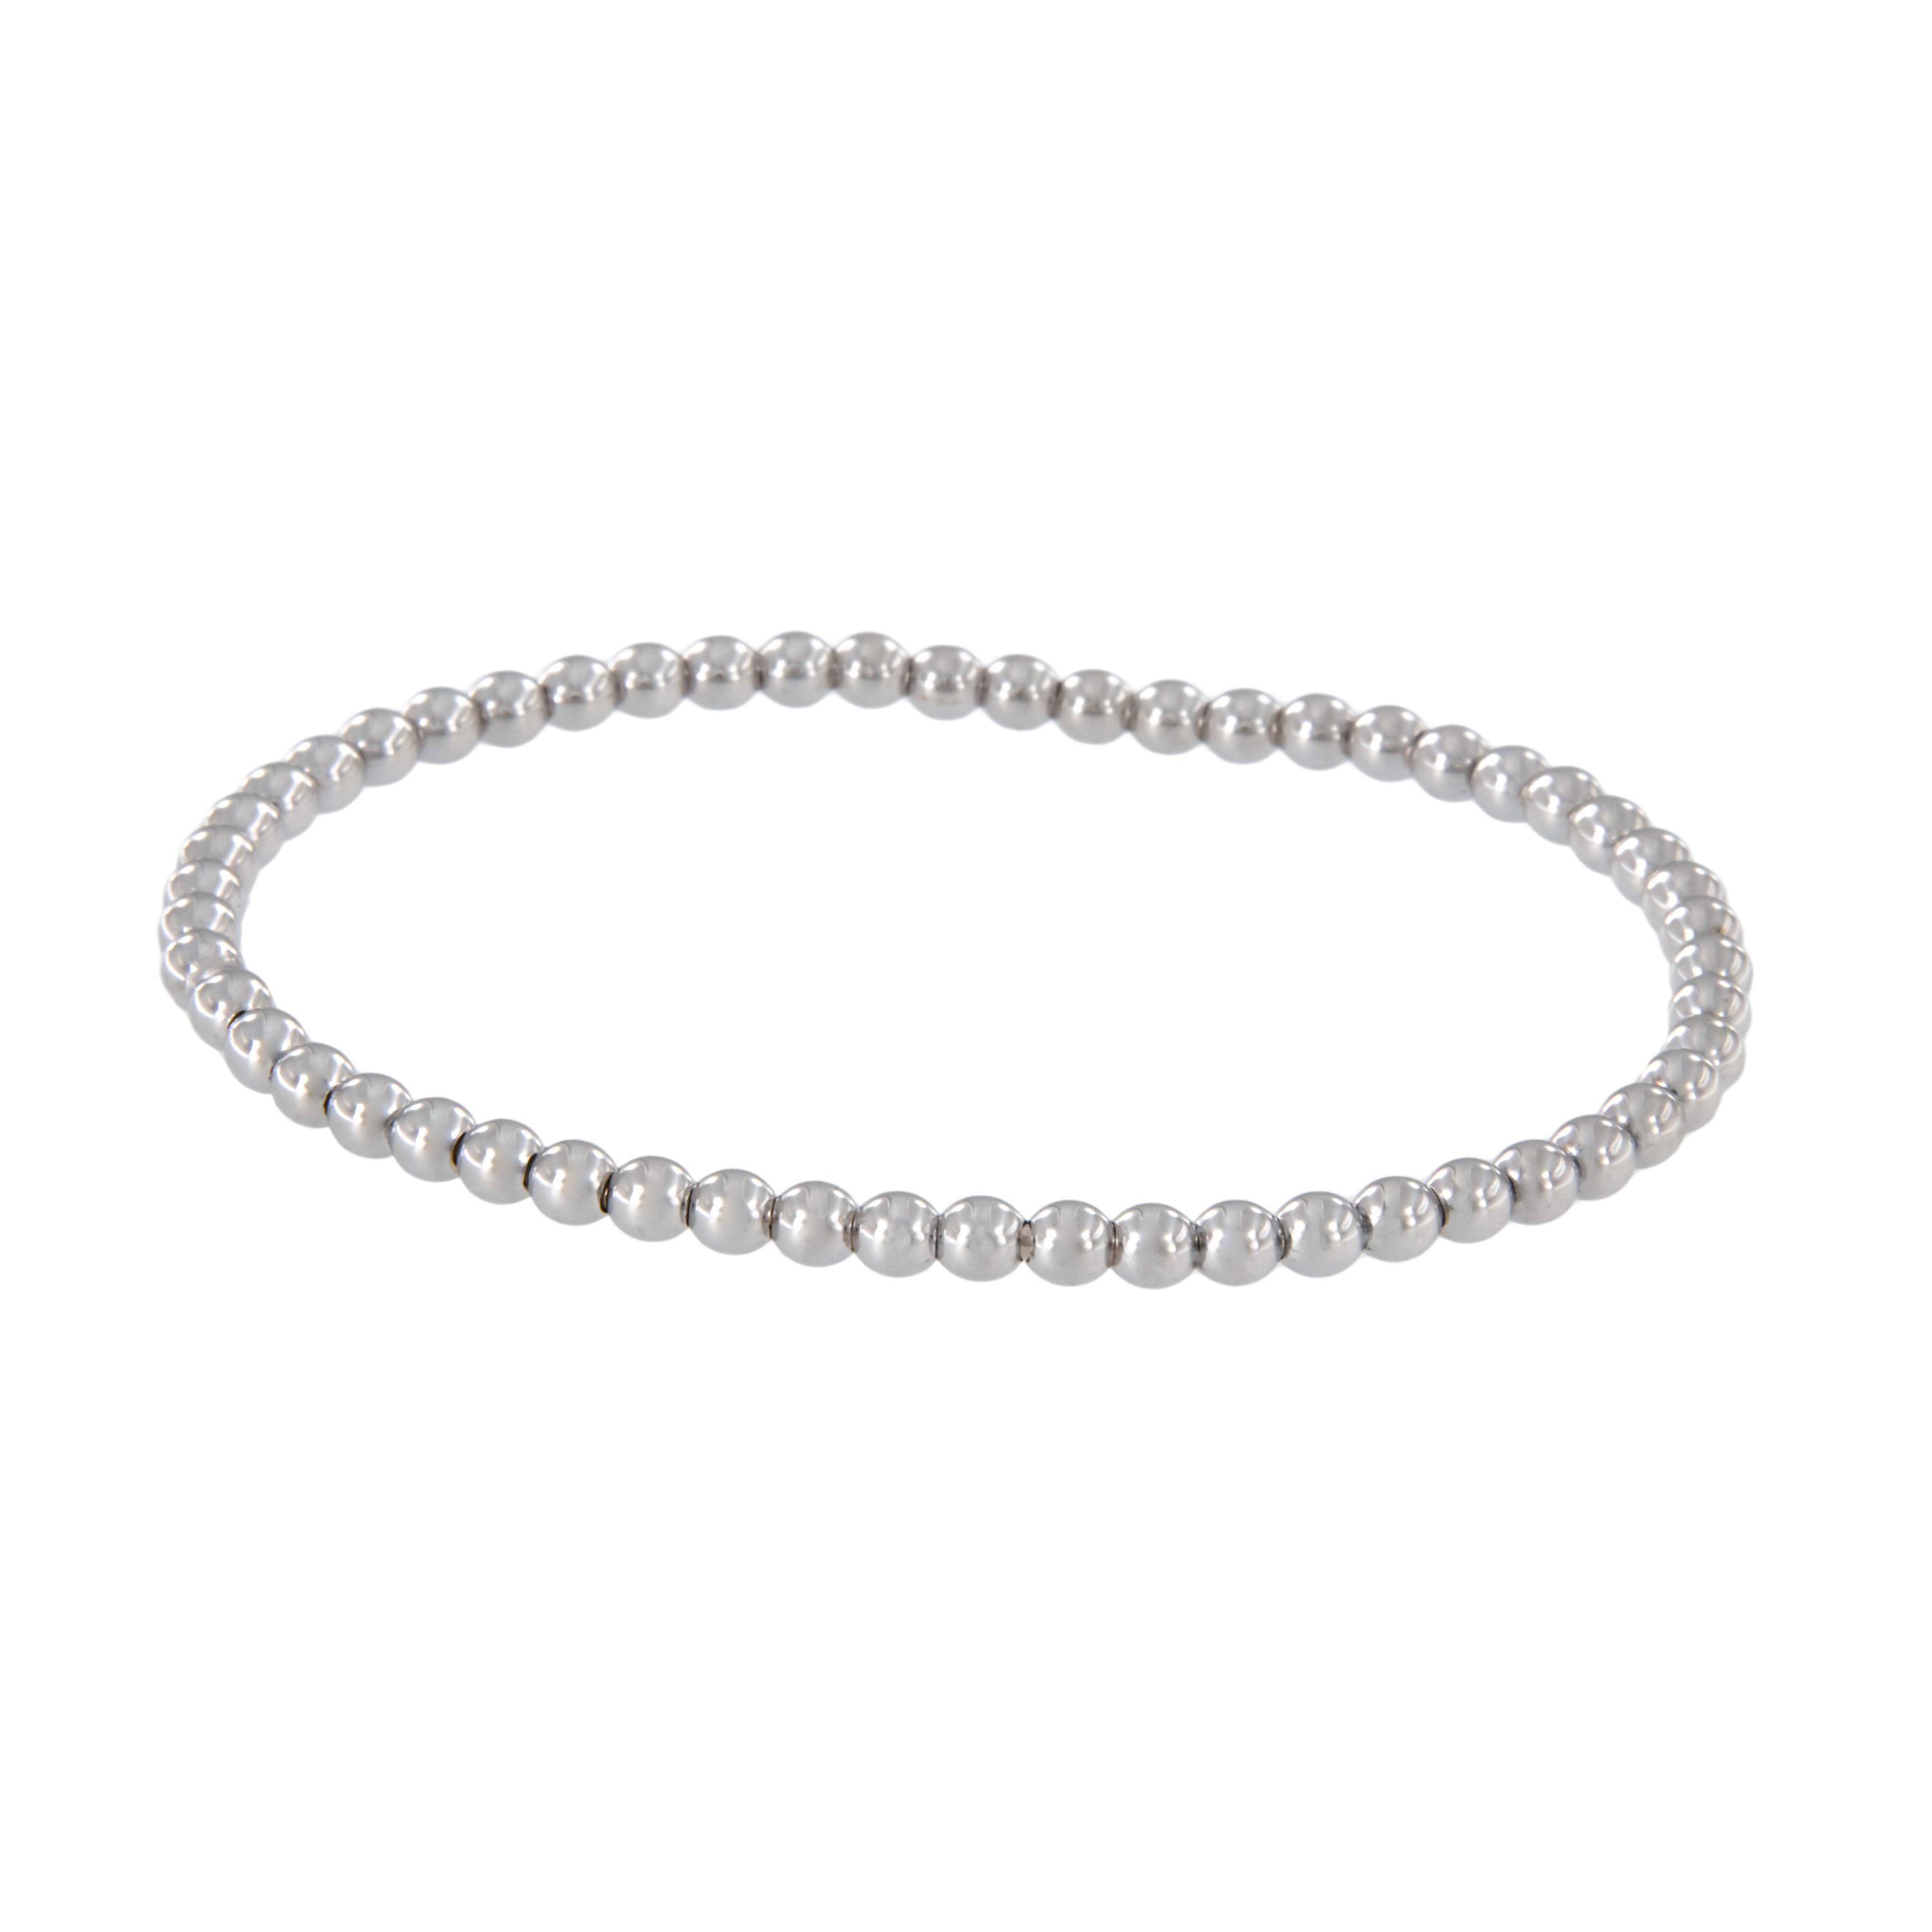 Known for their expert jewelry engineering, Italian craftsman specialize the stretch jewelry! This fun bracelet stretches to fit your wrist perfectly for a spectacular look! Can be worn every day, dressed up or stacked! See our other stretch